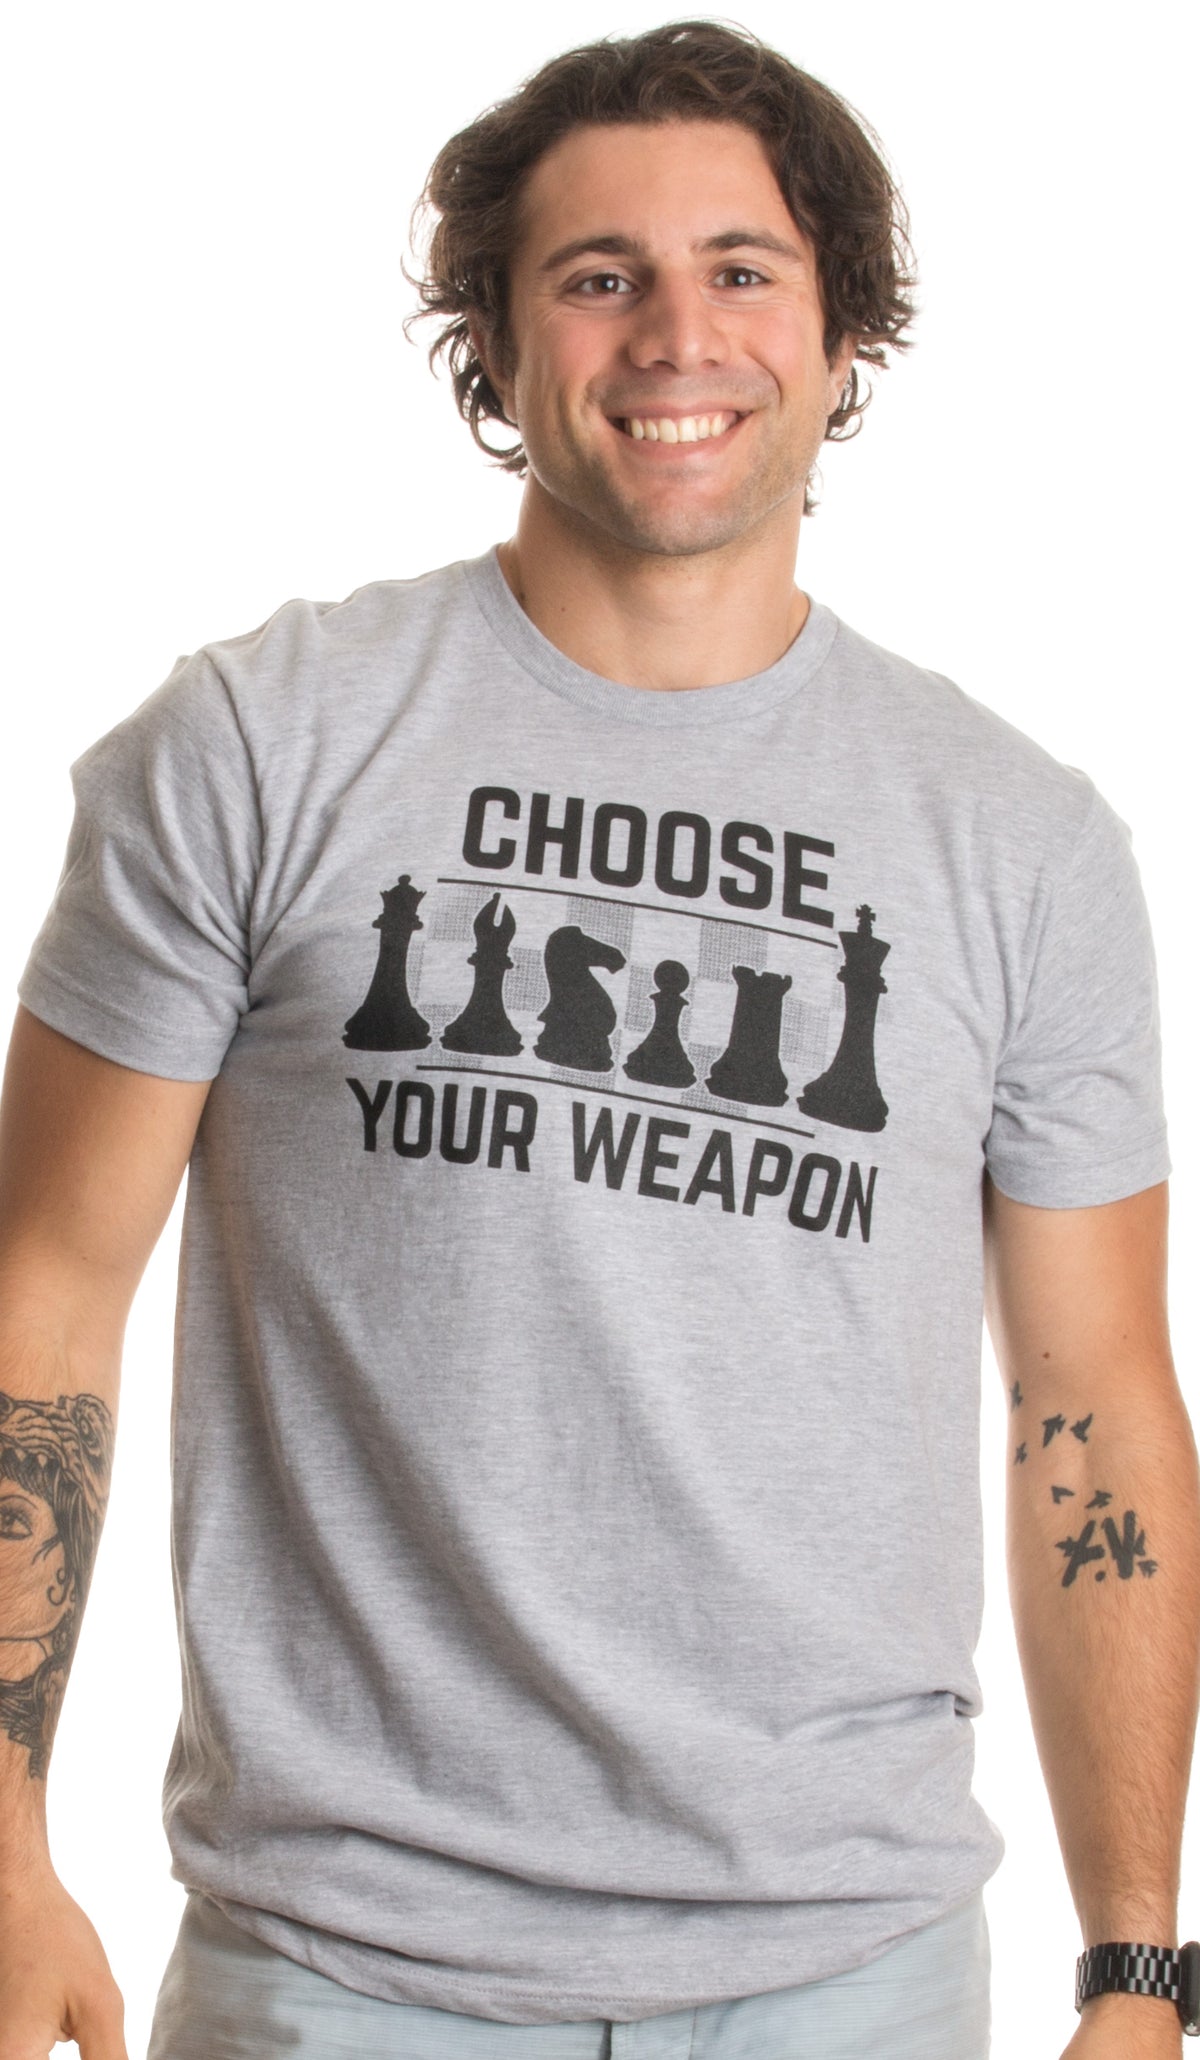 Chess - Choose Your Weapon | Funny Player Joke, Club Team Set Game Humor T-shirt